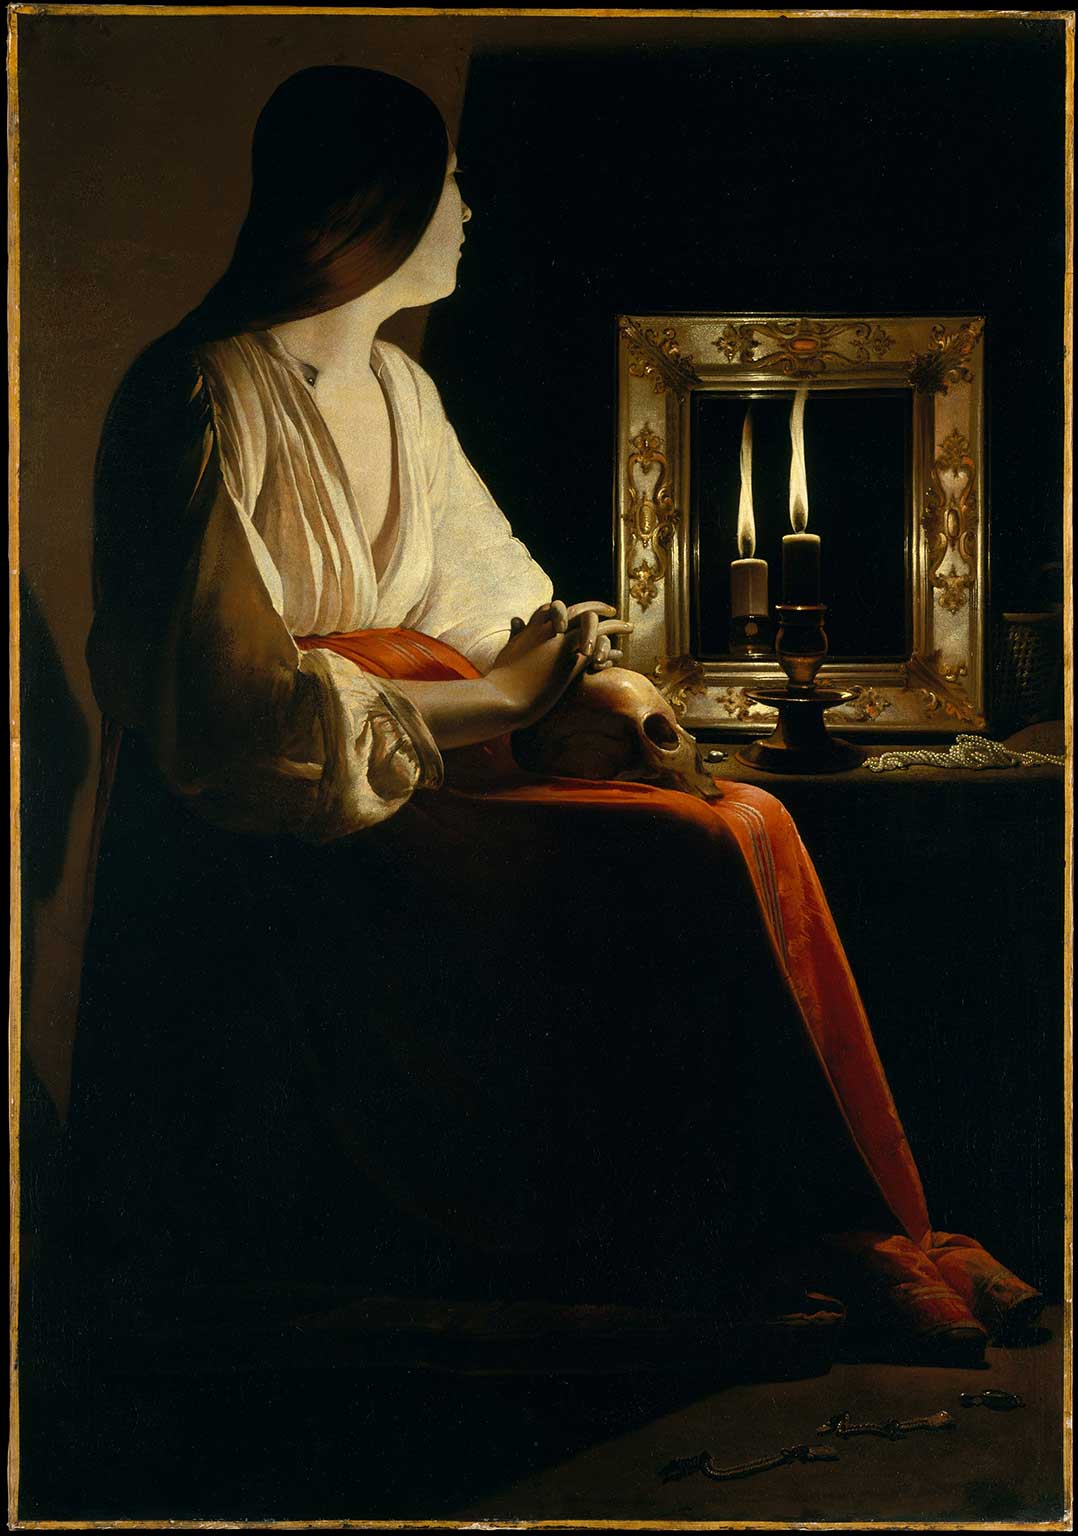 Georges de la Tour's "The Penitent Magdalen," which was one of the works discussed during the fall symposium “Thinking with Early Modern Painting: Self-Awareness, Bodies, Rhetoric.”